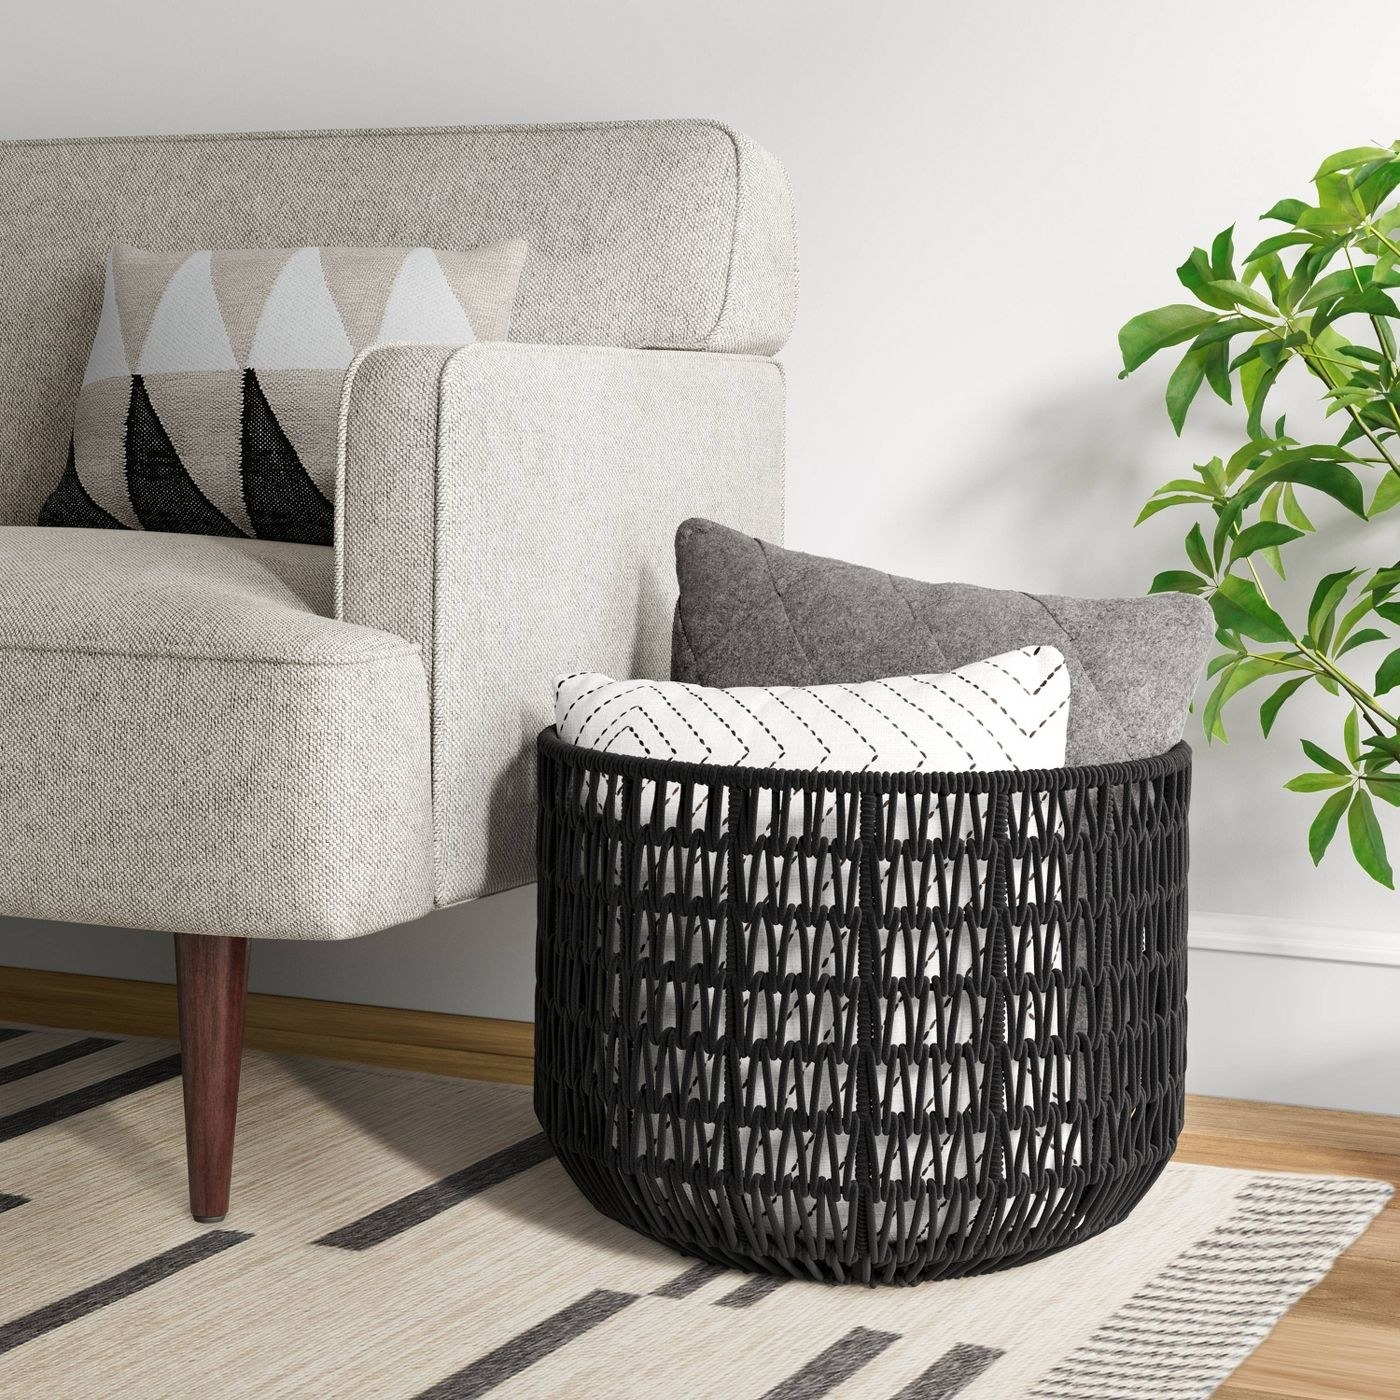 the woven rope basket in black sitting next to a couch with pillows in it